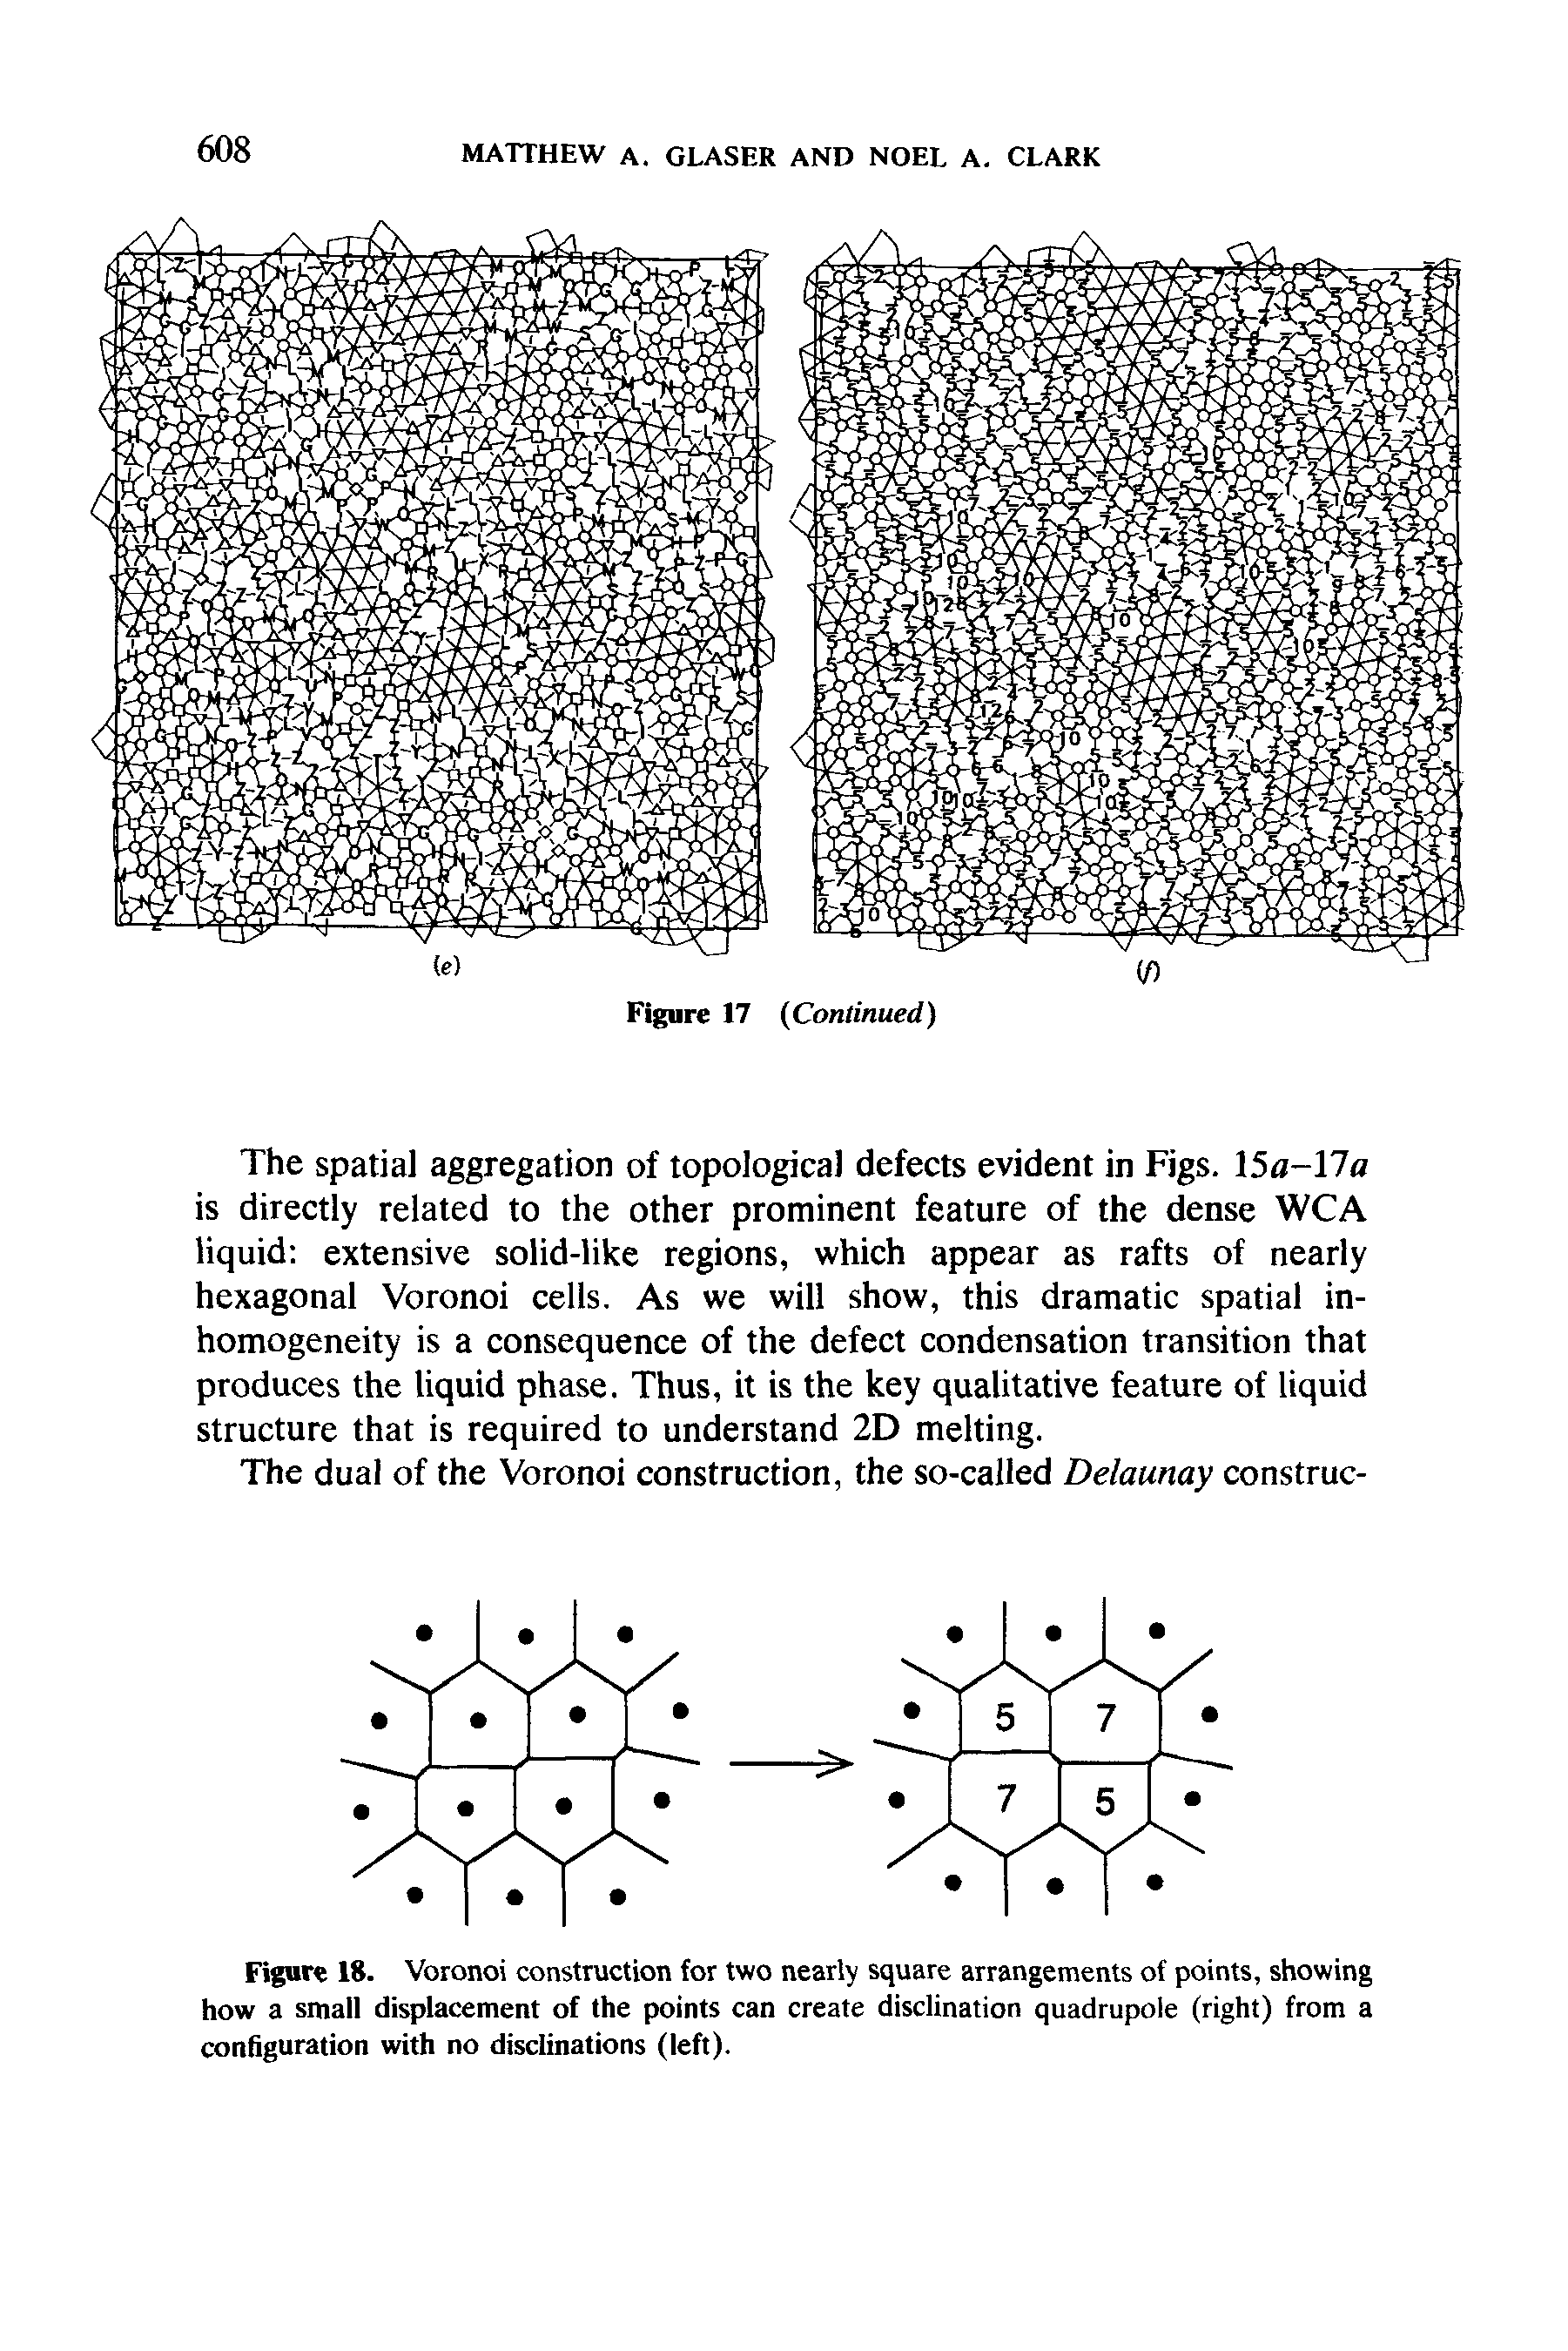 Figurc 18. Voronoi construction for two nearly square arrangements of points, showing how a small displacement of the points can create disclination quadrupole (right) from a configuration with no disclinations (left).